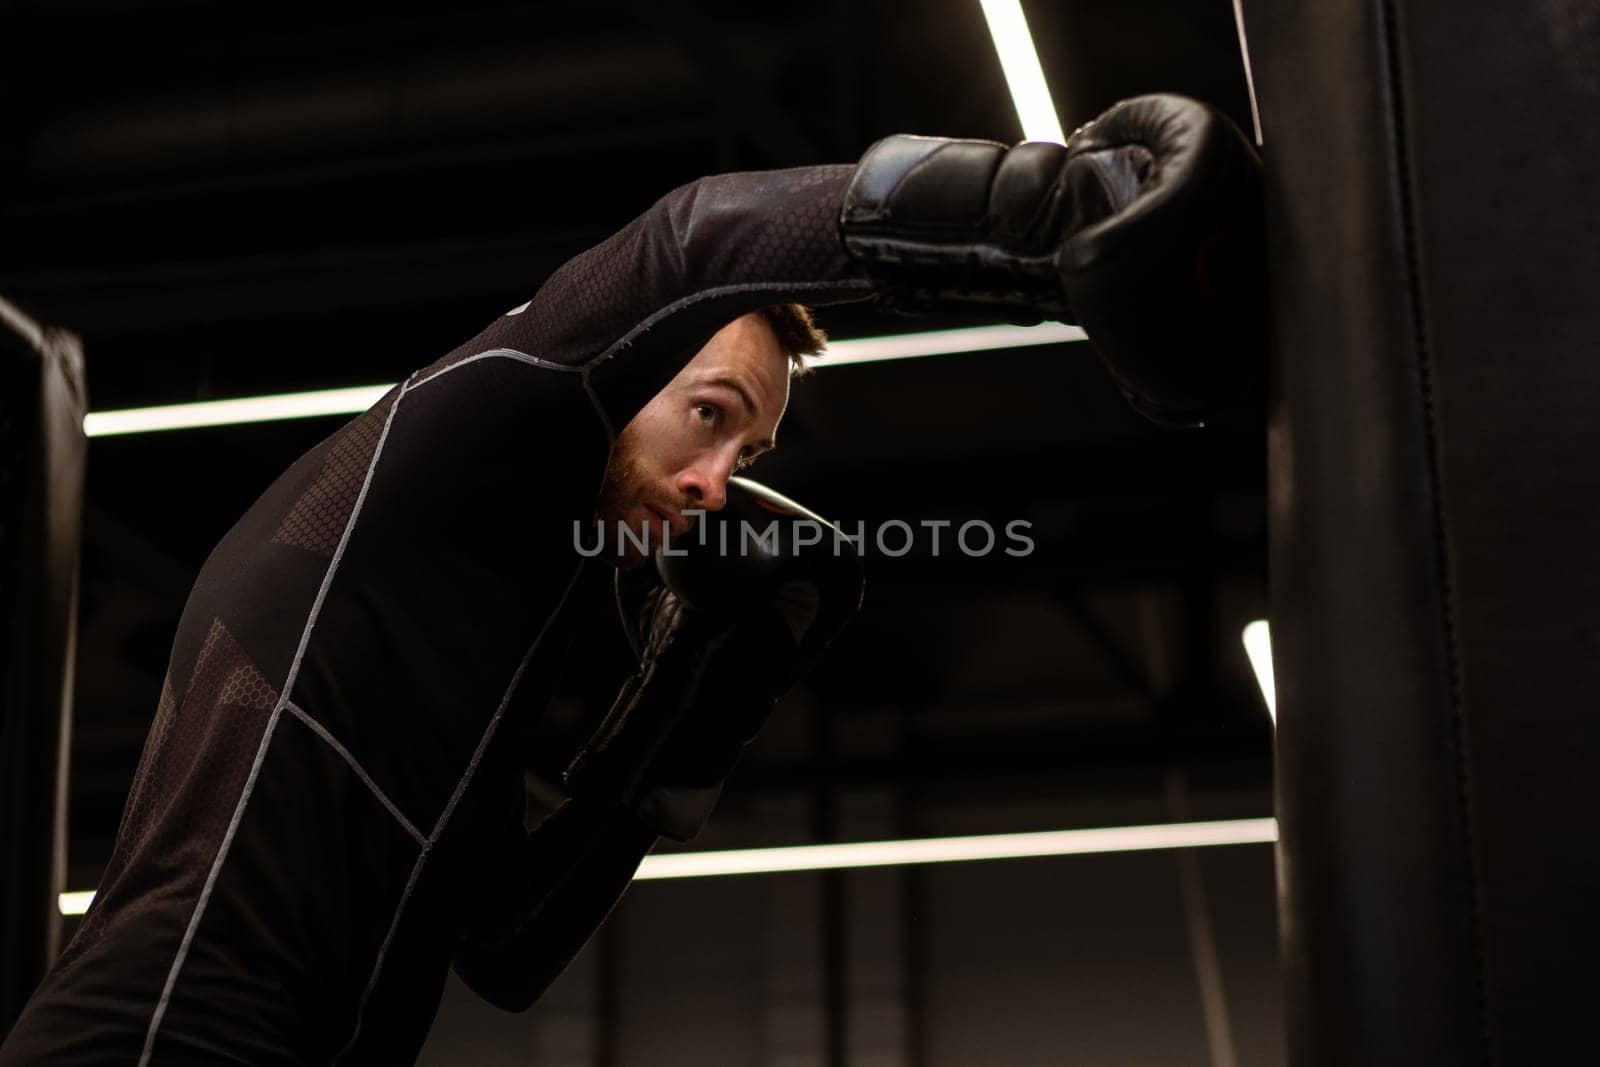 Concentrated boxer practicing punches on heavy bag in gym by nazarovsergey